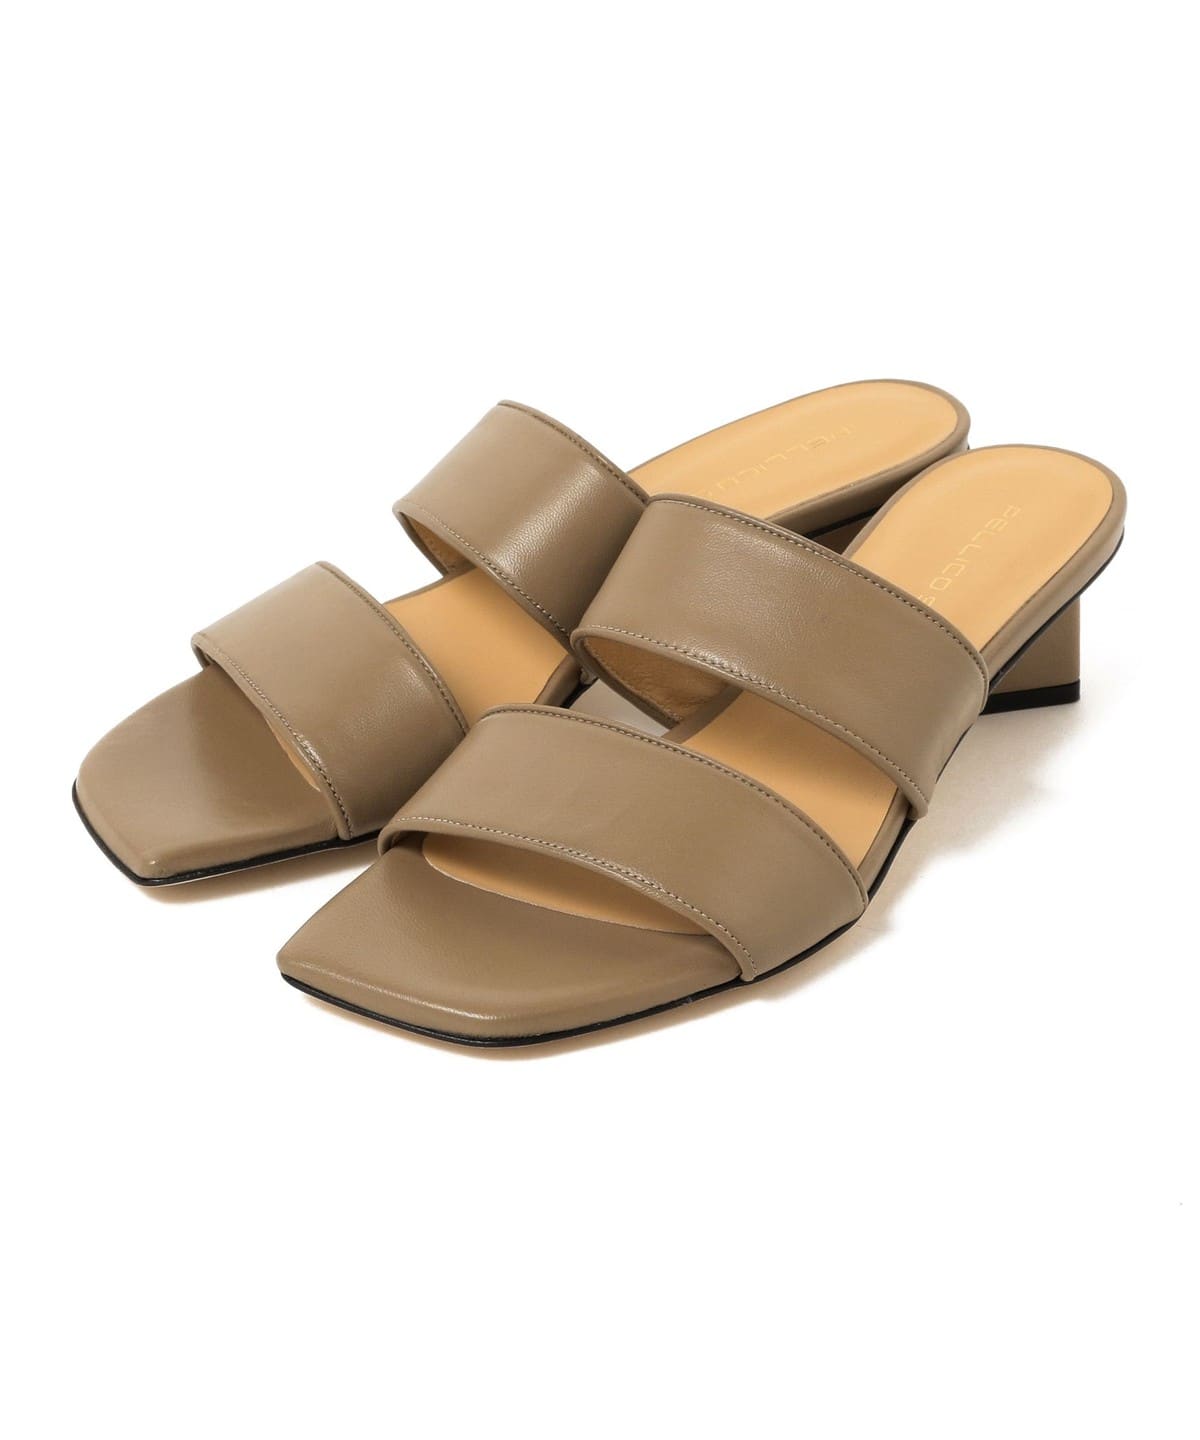 Demi-Luxe BEAMS [Demi-Luxe BEAMS] PELLICO SUNNY / Smooth leather 2 